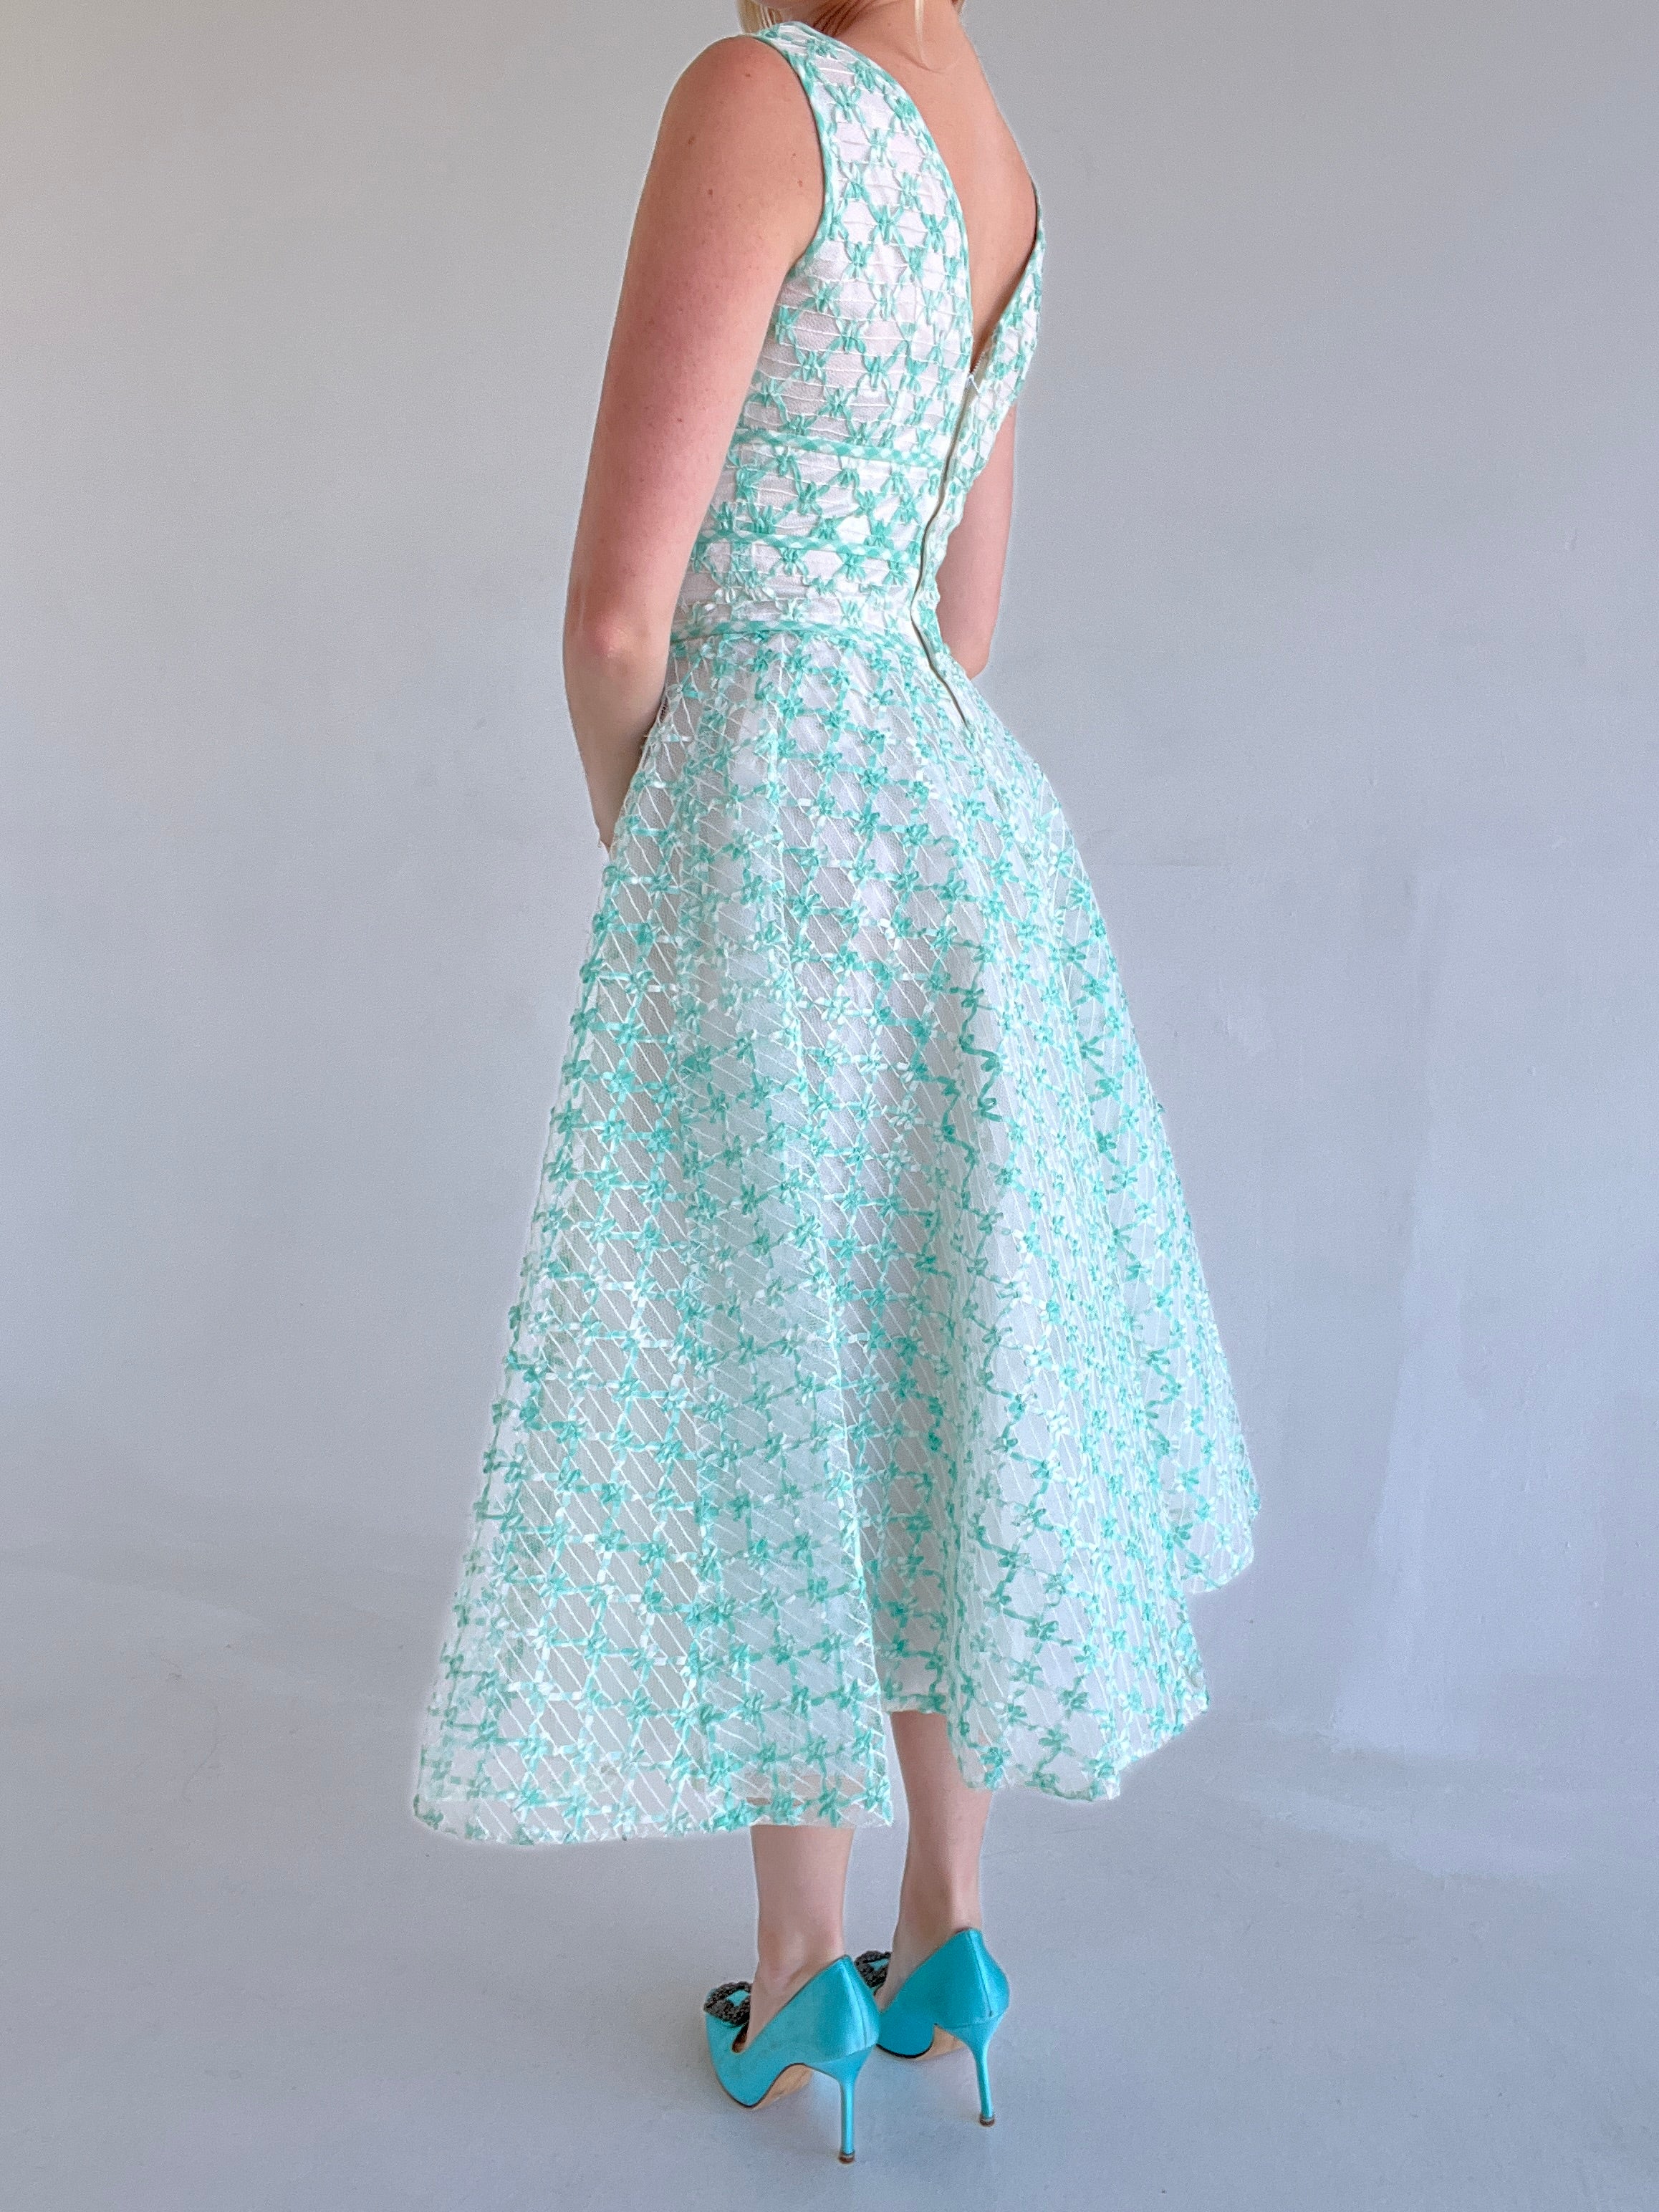 1950's Turquoise and White Dress